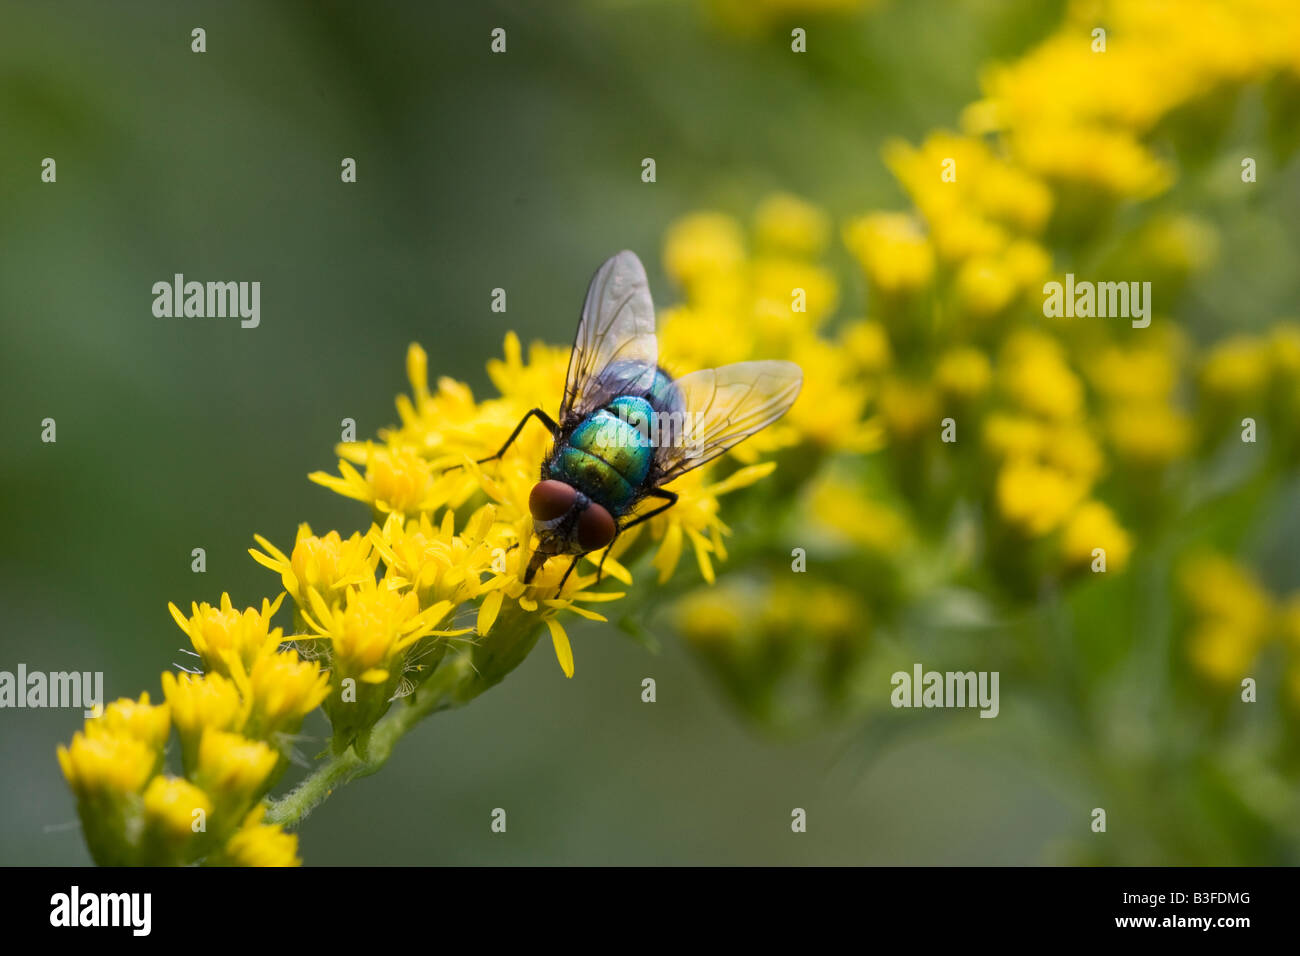 A common green bottle fly Lucilia sericata on the yellow flowers of a goldenrod solidago Stock Photo